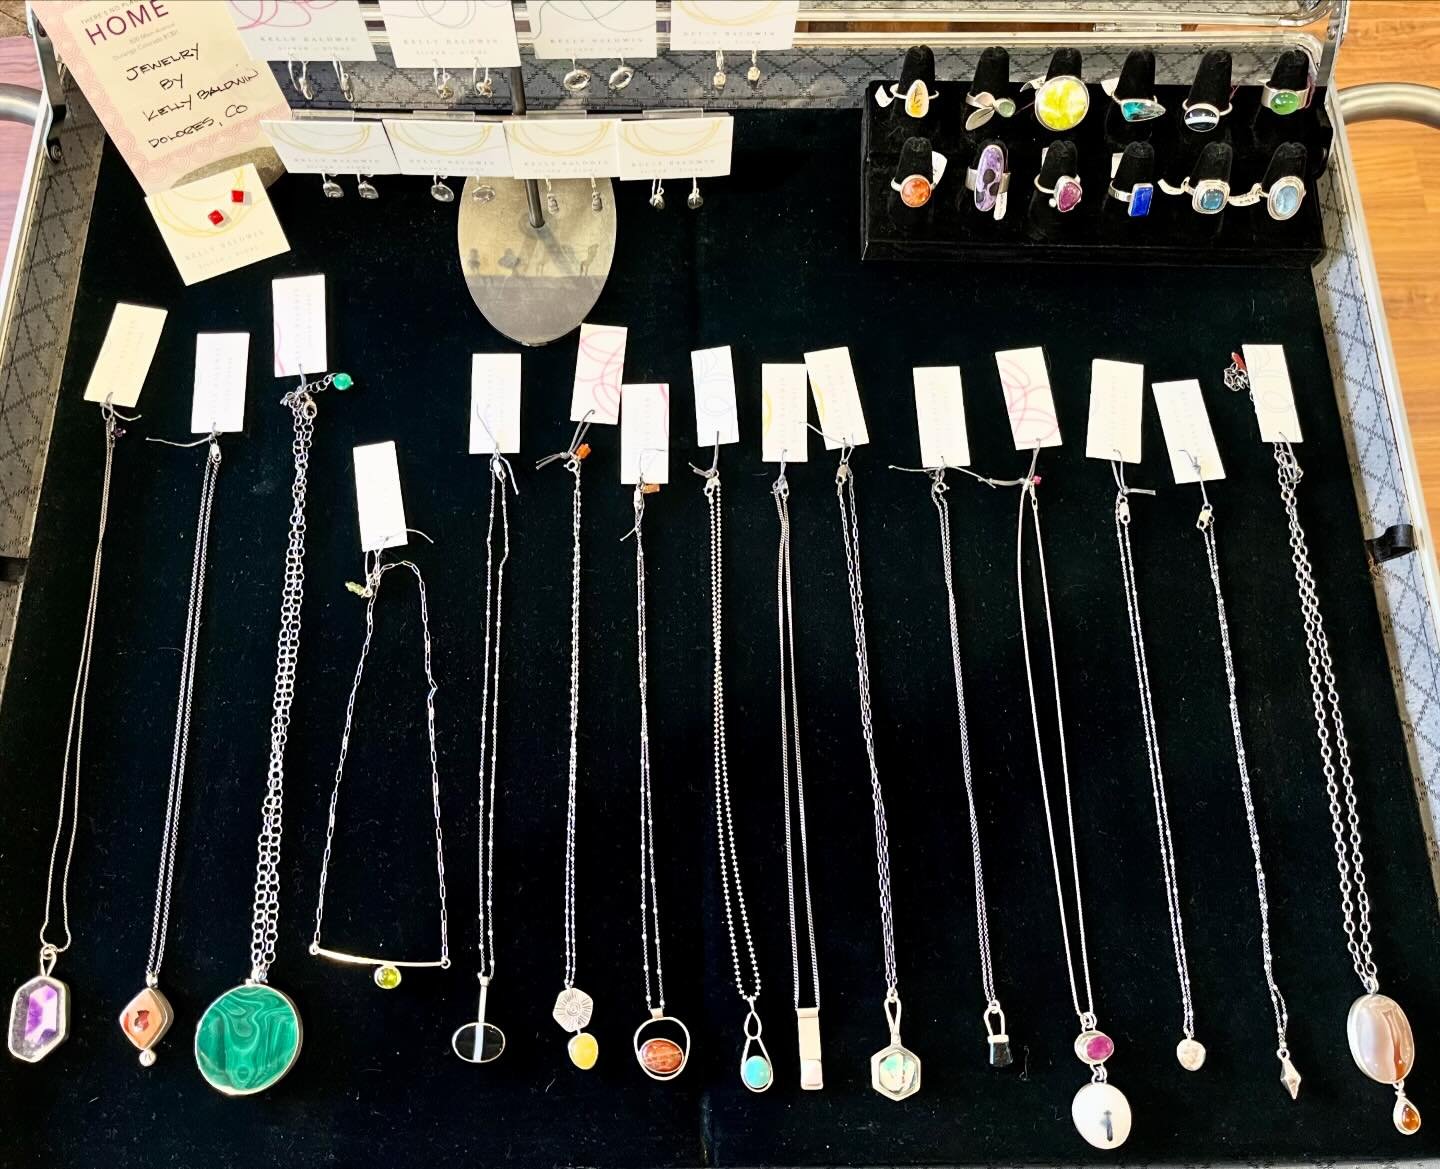 In love with this treasure chest from local artist Kelly Baldwin!! #newjewelry #handmadejewelry #gemstonejewelry #localartist #shoplocal #theresnoplacelikehome #downtowndurango #durango #colorado